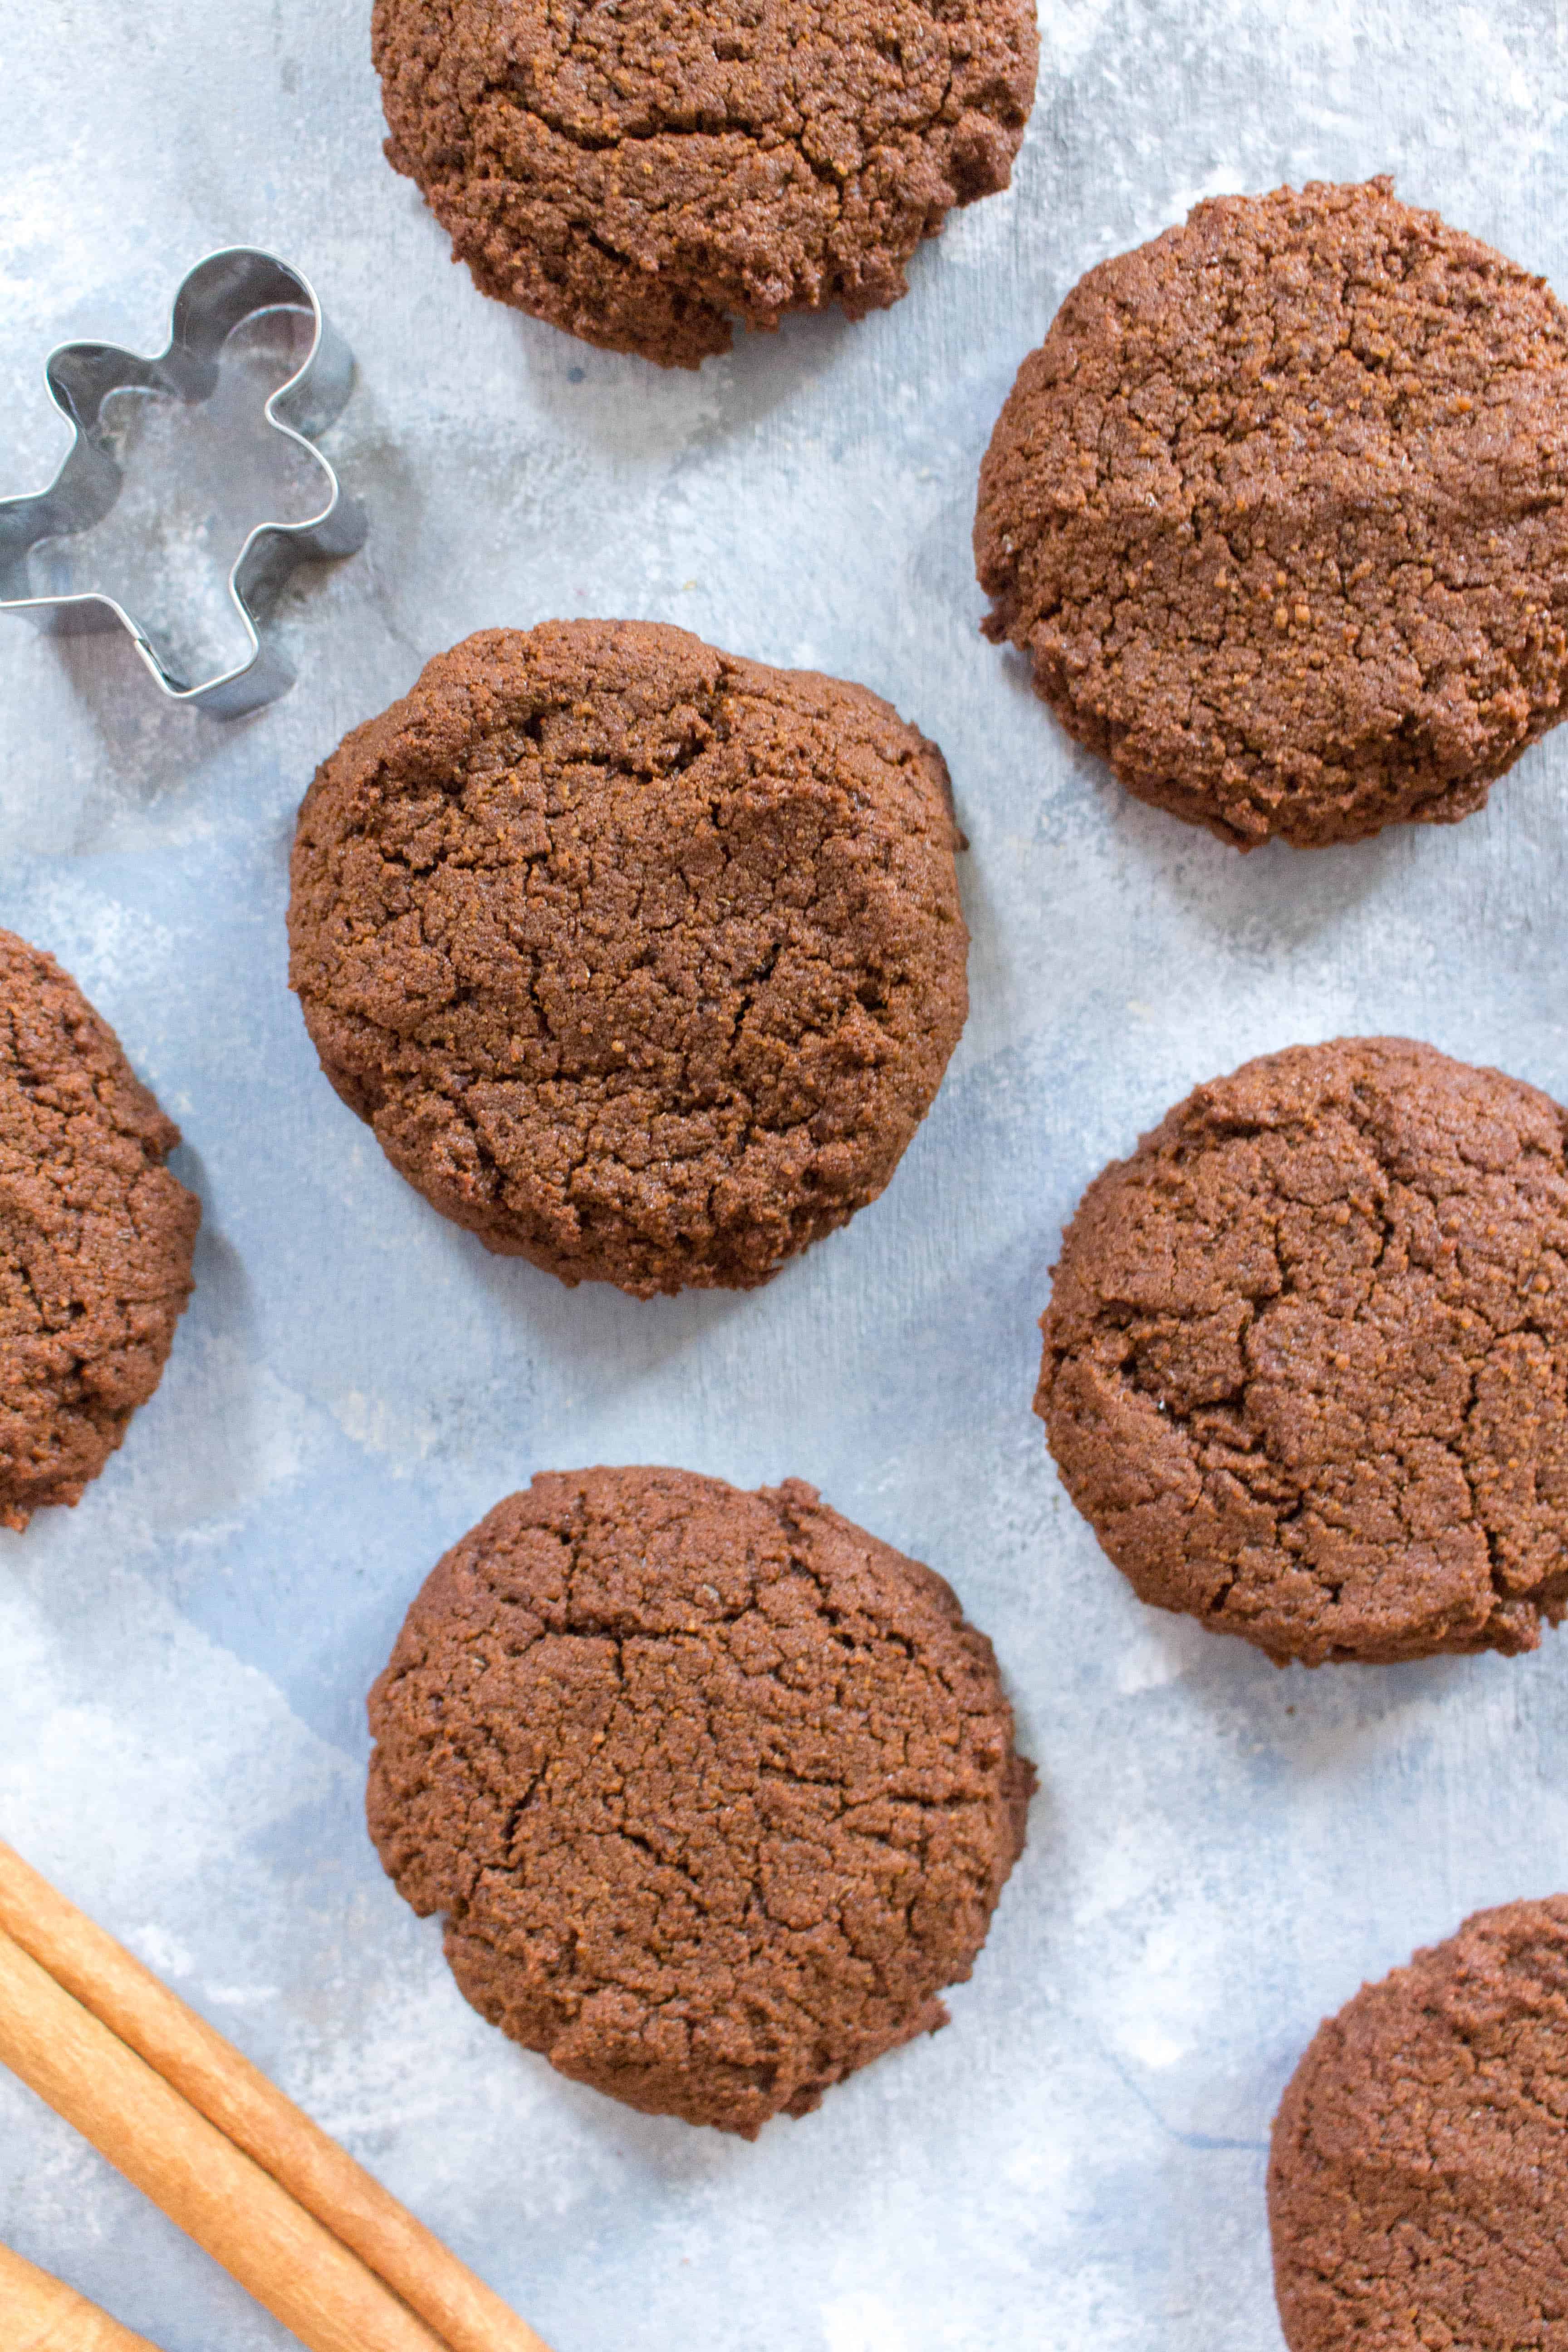 These ginger snap cookies are deliciously chewy with tons of flavour from the molasses and warm spices. These gluten-free, paleo, and vegan ginger snap cookies are sure to be a hit with your friends and family! #PaleoBaking #GlutenFreeBaking #VeganBaking